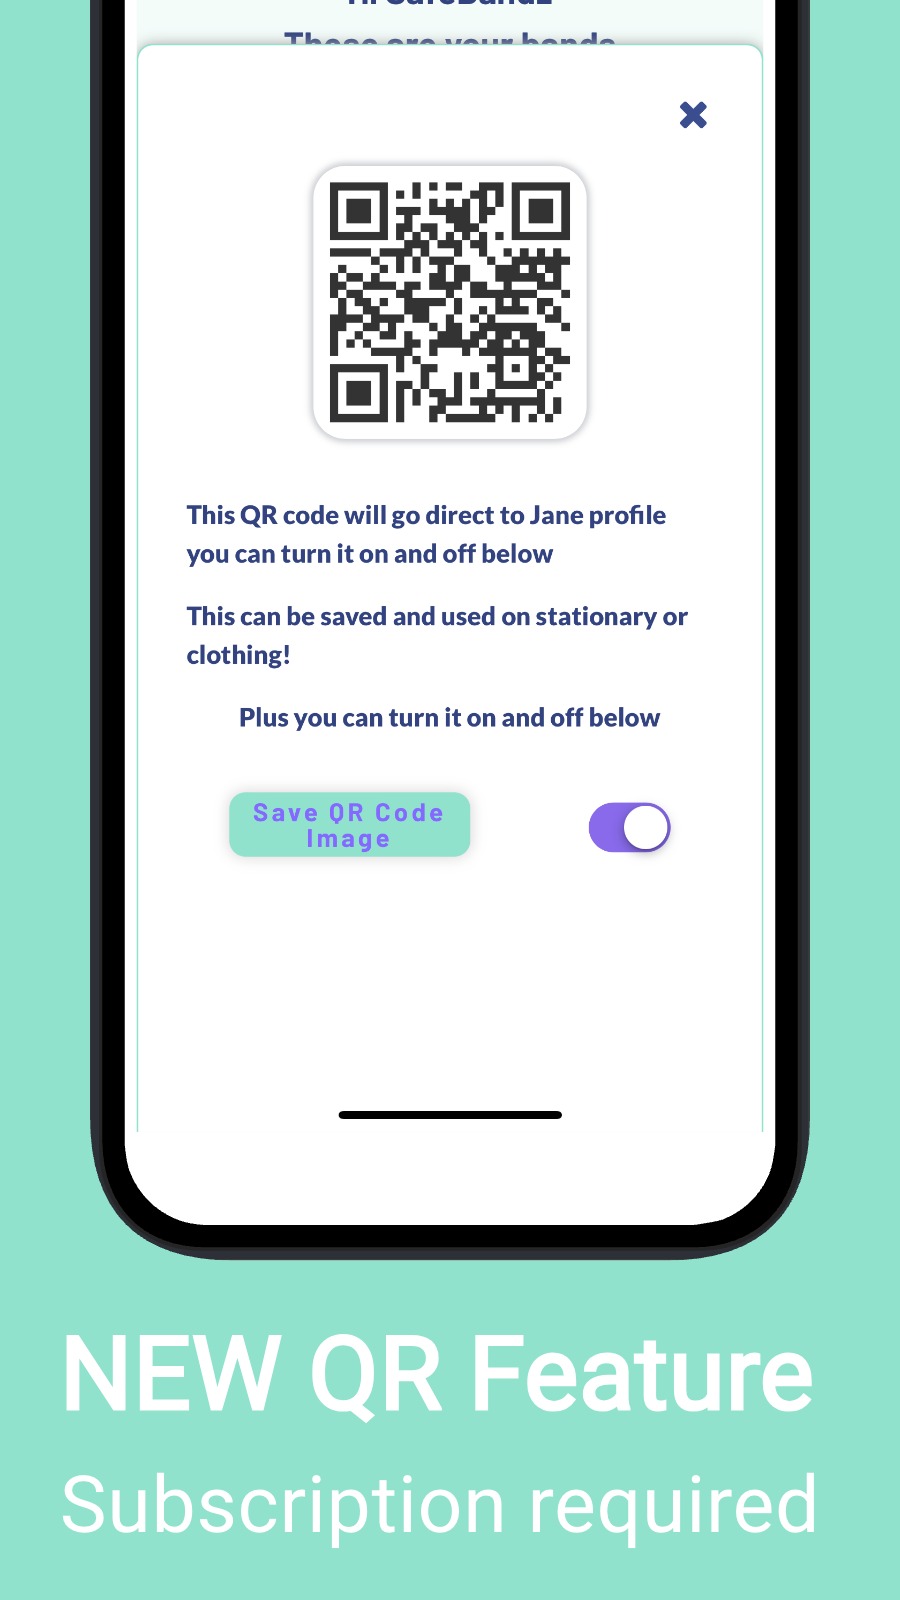 NEW QR Feature - Subscription required